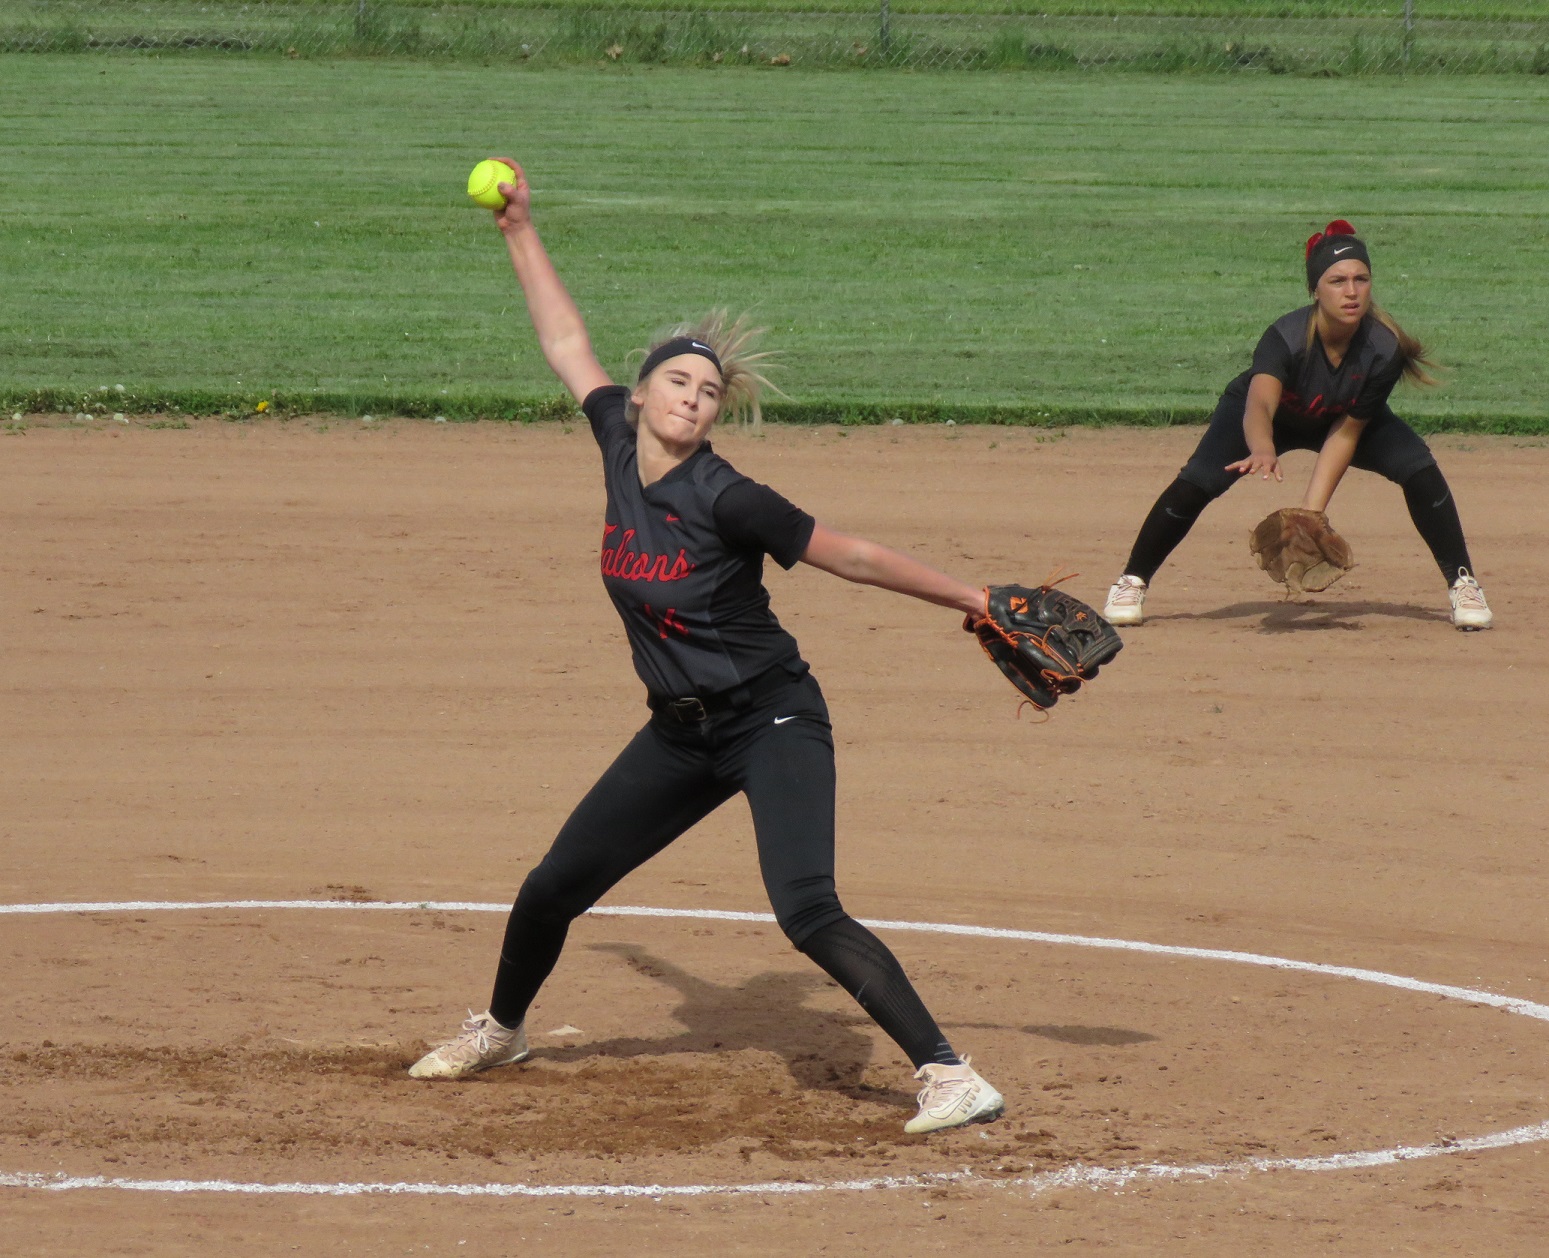 Madison Kwitchoff delivers a pitch versus Frontier in the quarterfinals of the Class AA Section VI playoffs. Kwitchoff was the winning pitcher for the Falcons. (Photos by David Yarger)